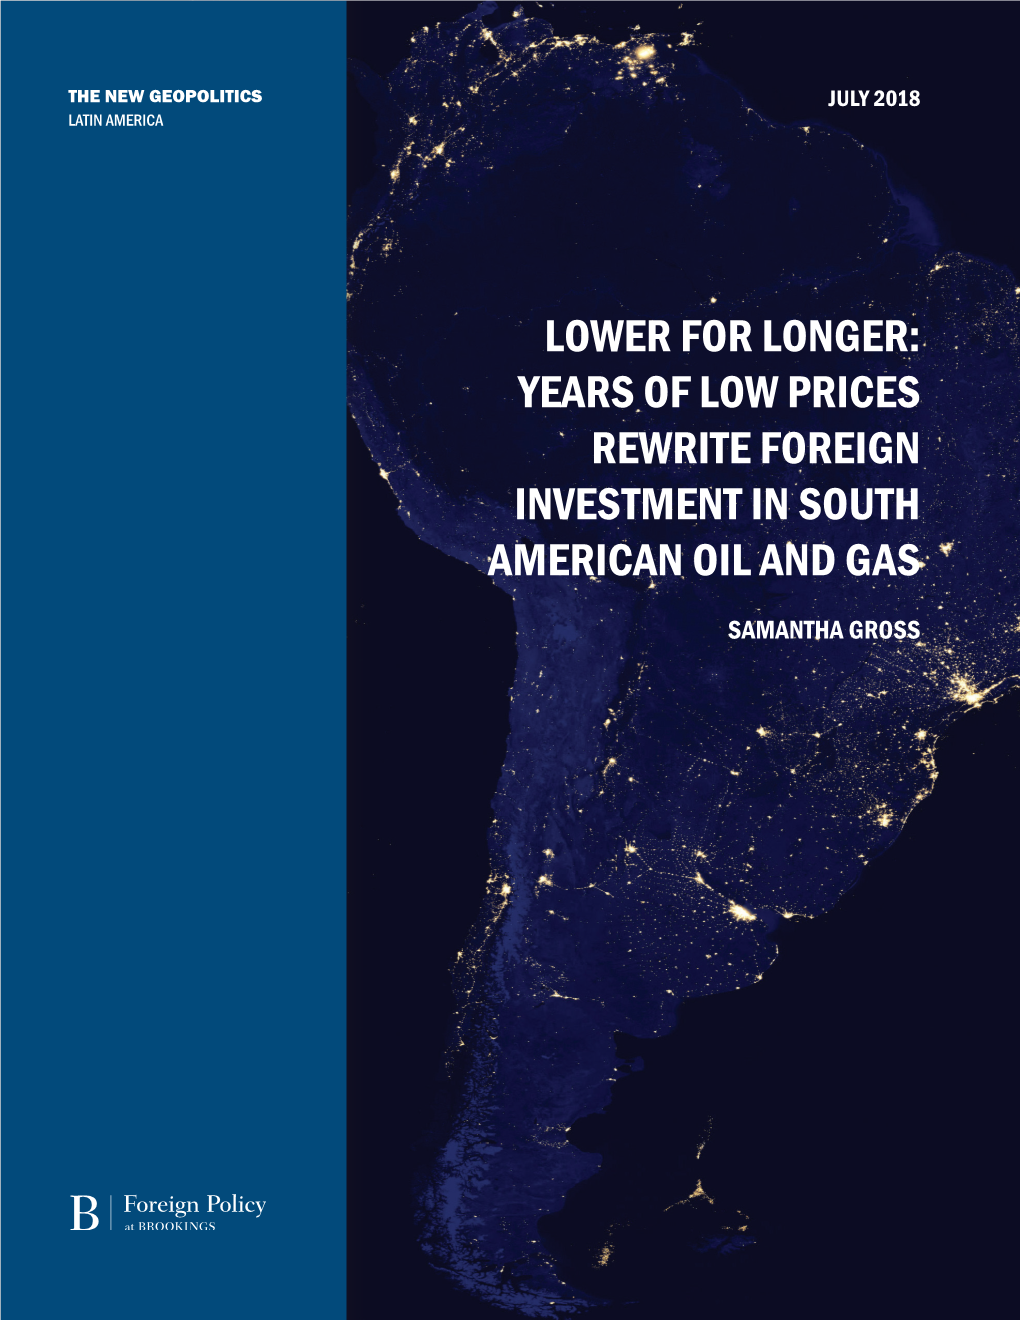 Lower for Longer: Years of Low Prices Rewrite Foreign Investment in South American Oil and Gas